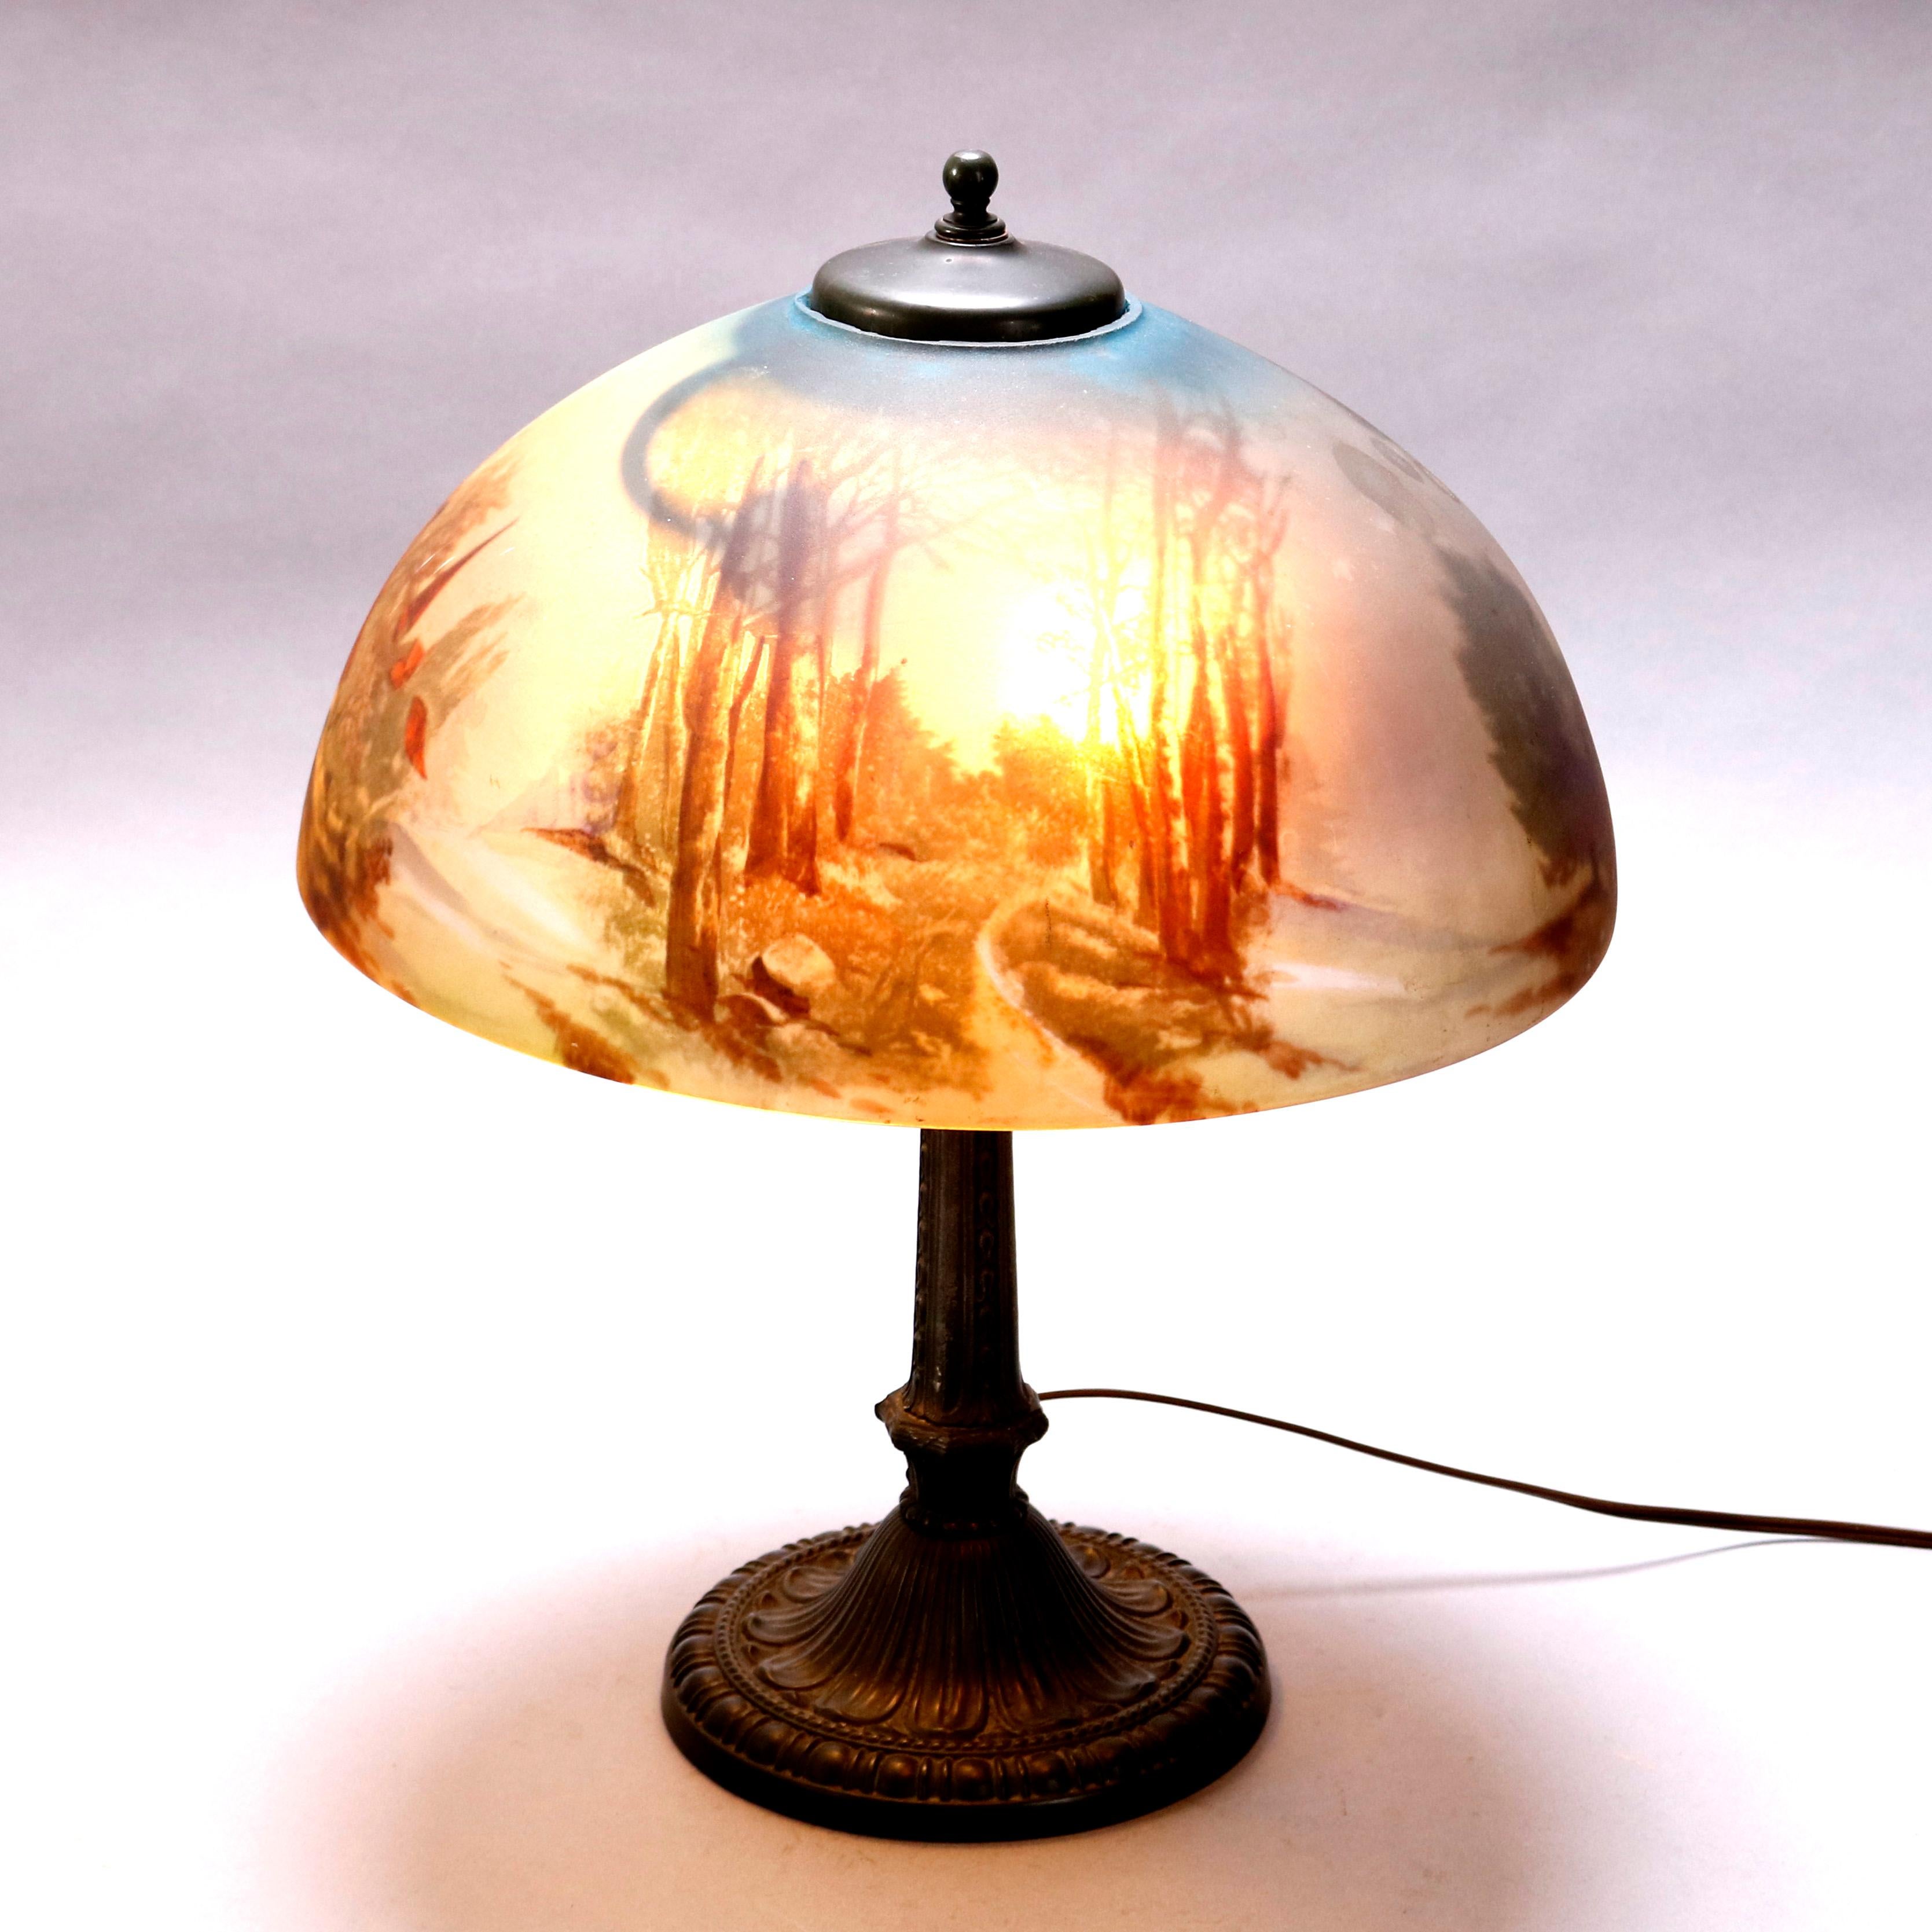 20th Century Pittsburgh School Reverse Painted Table Lamp by E. Miller & Co., circa 1920